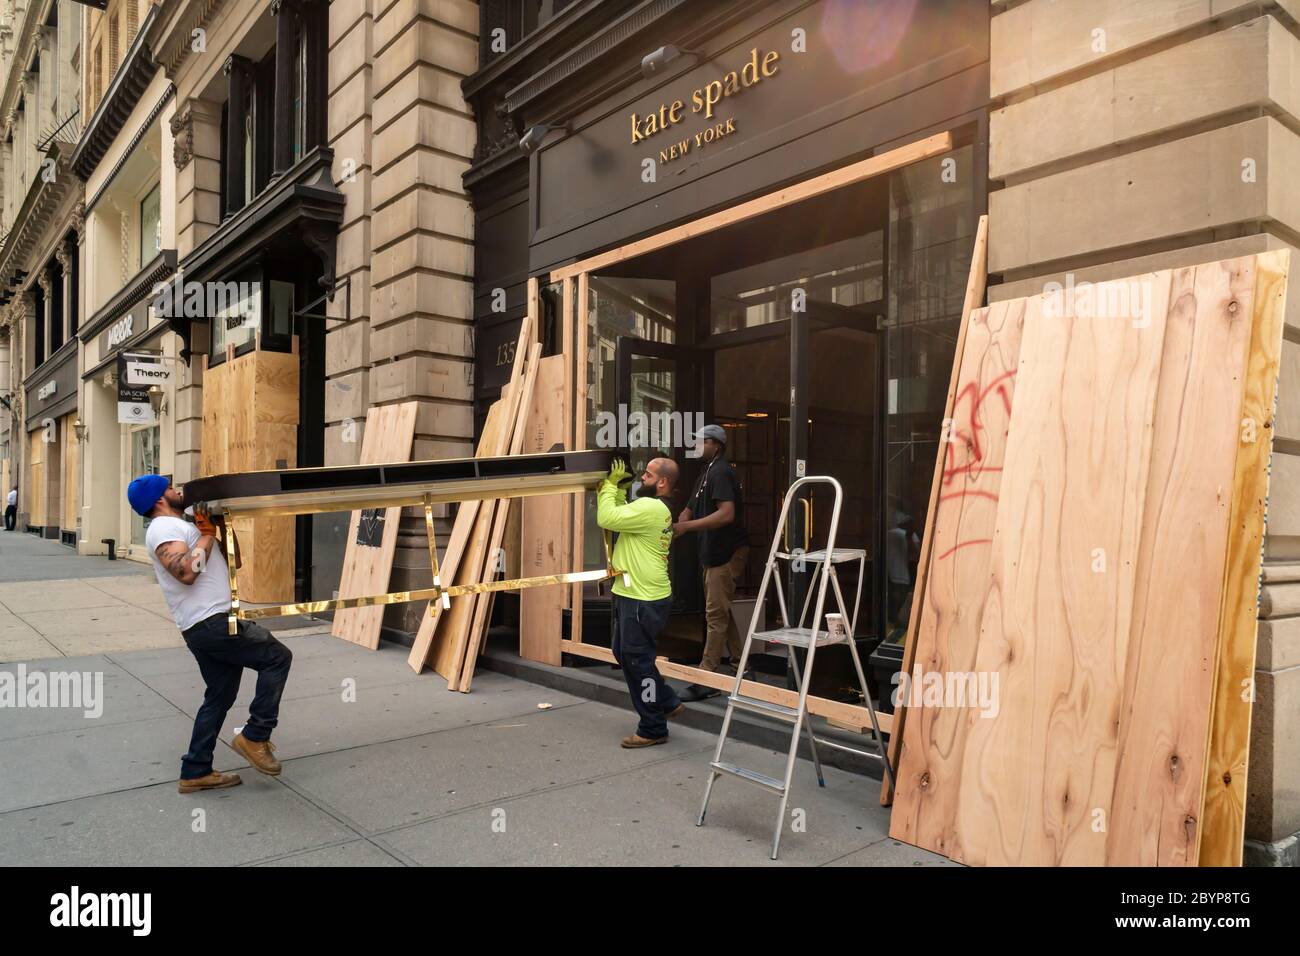 Workers remove fixtures from a Kate Spade store in the Flatiron neighborhood in New York after looting and vandalization associated with the protests related to the death of George Floyd, seen on Wednesday, June 3, 2020. (© Richard B. Levine) Stock Photo